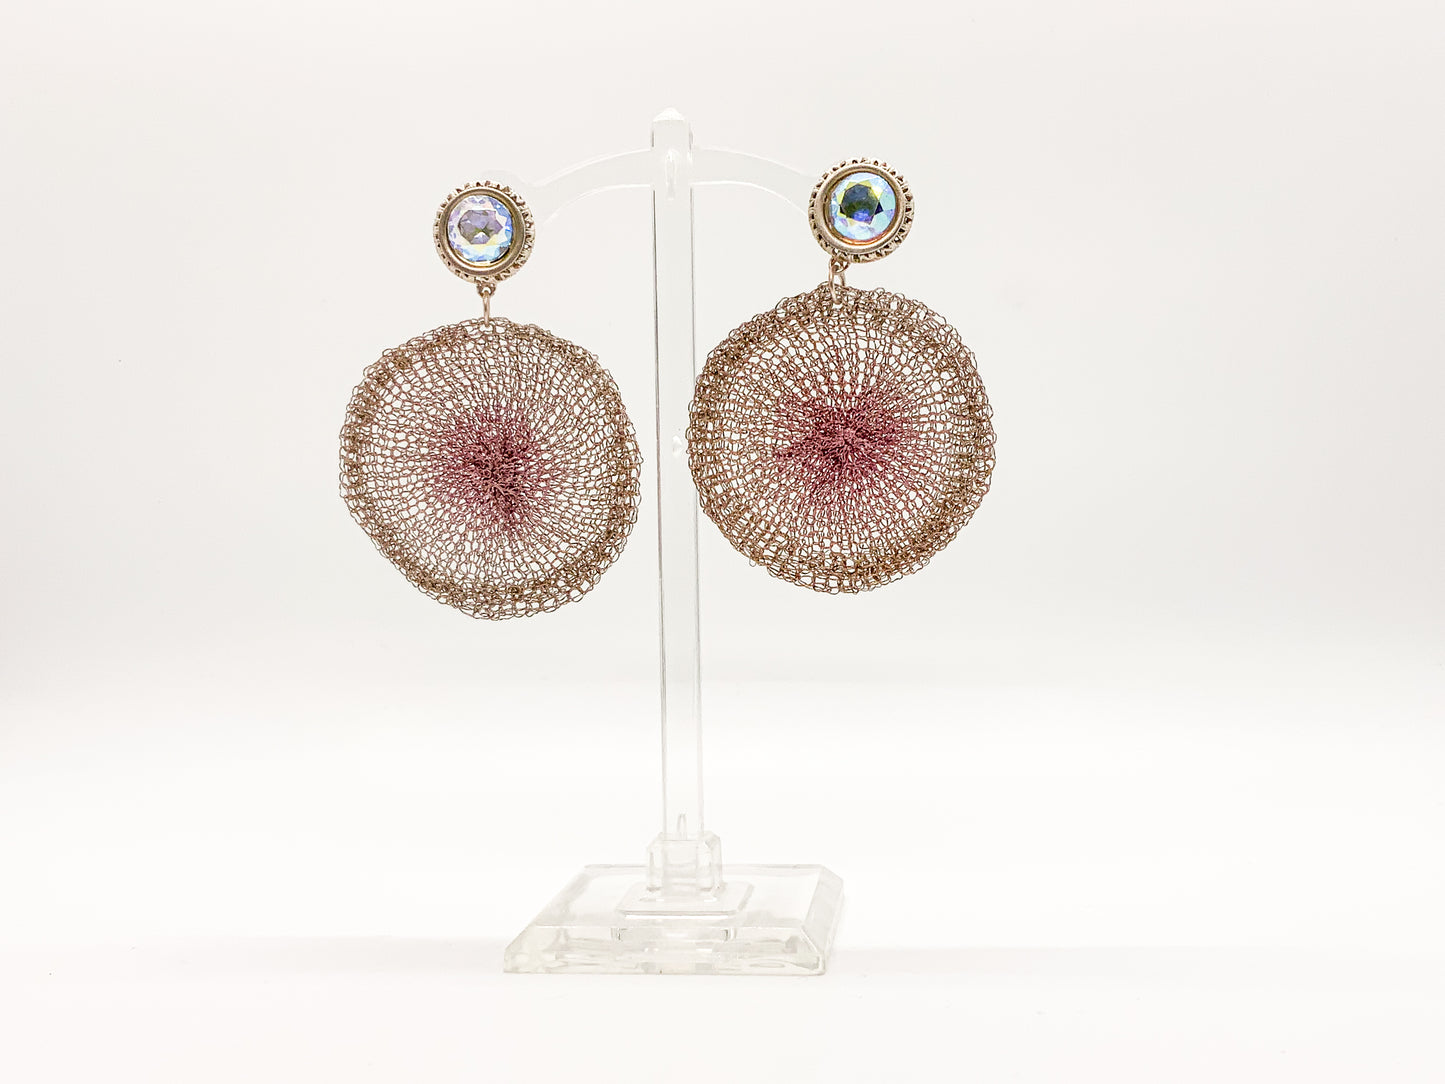 Knit Circle Earrings with Jewel Embellishment